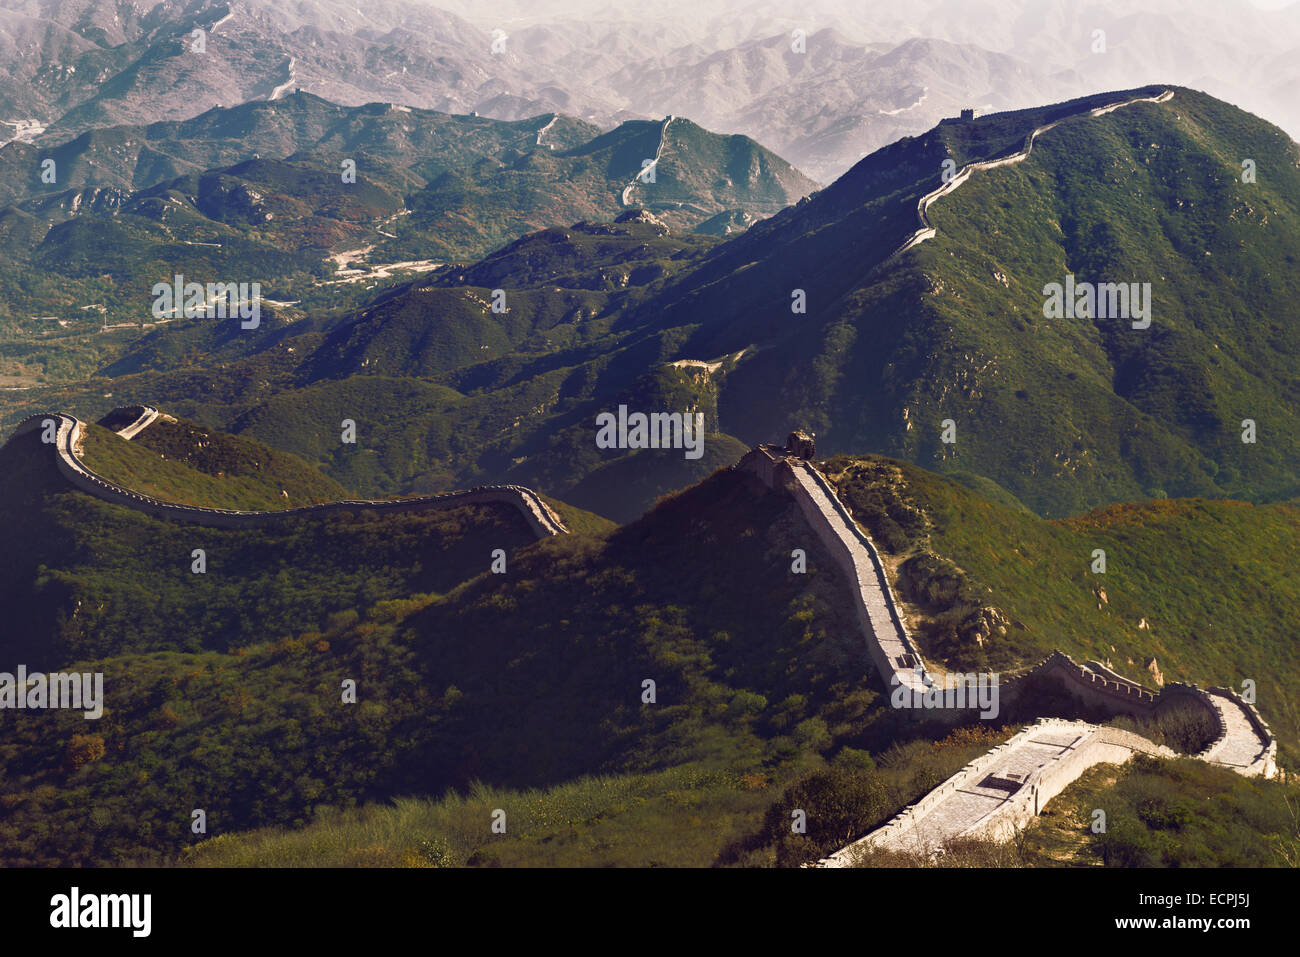 Great Wall of China aerial landscape scenery in Badaling, Beijing, China. Stock Photo